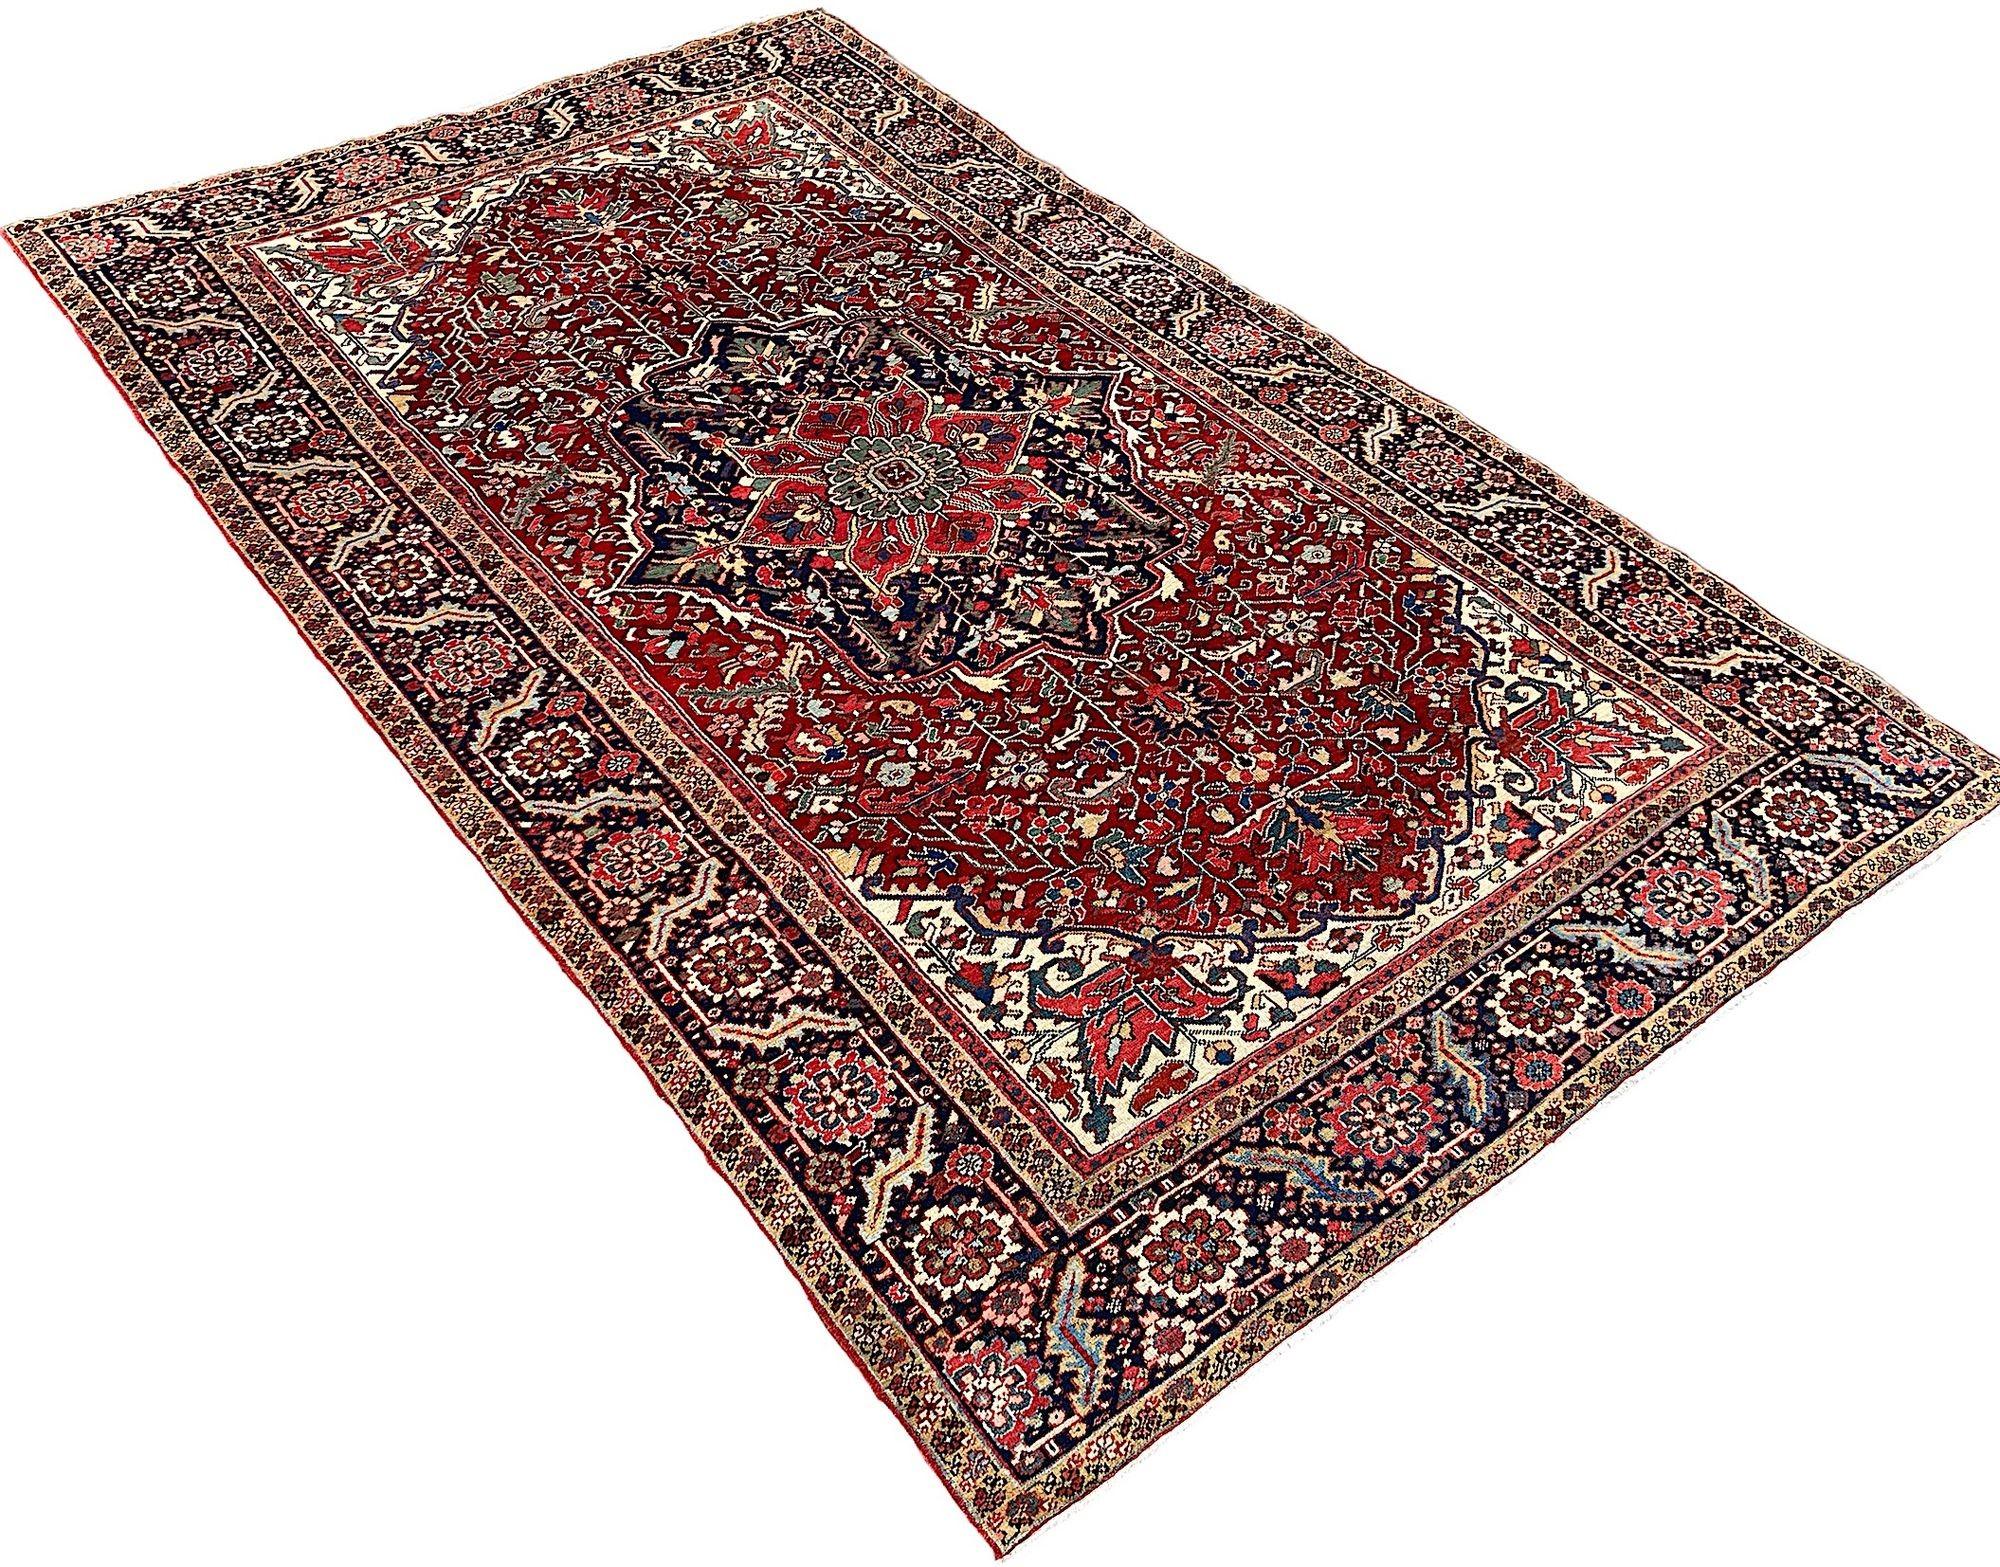 Antique Heriz Carpet 3.58m x 2.27m In Good Condition For Sale In St. Albans, GB